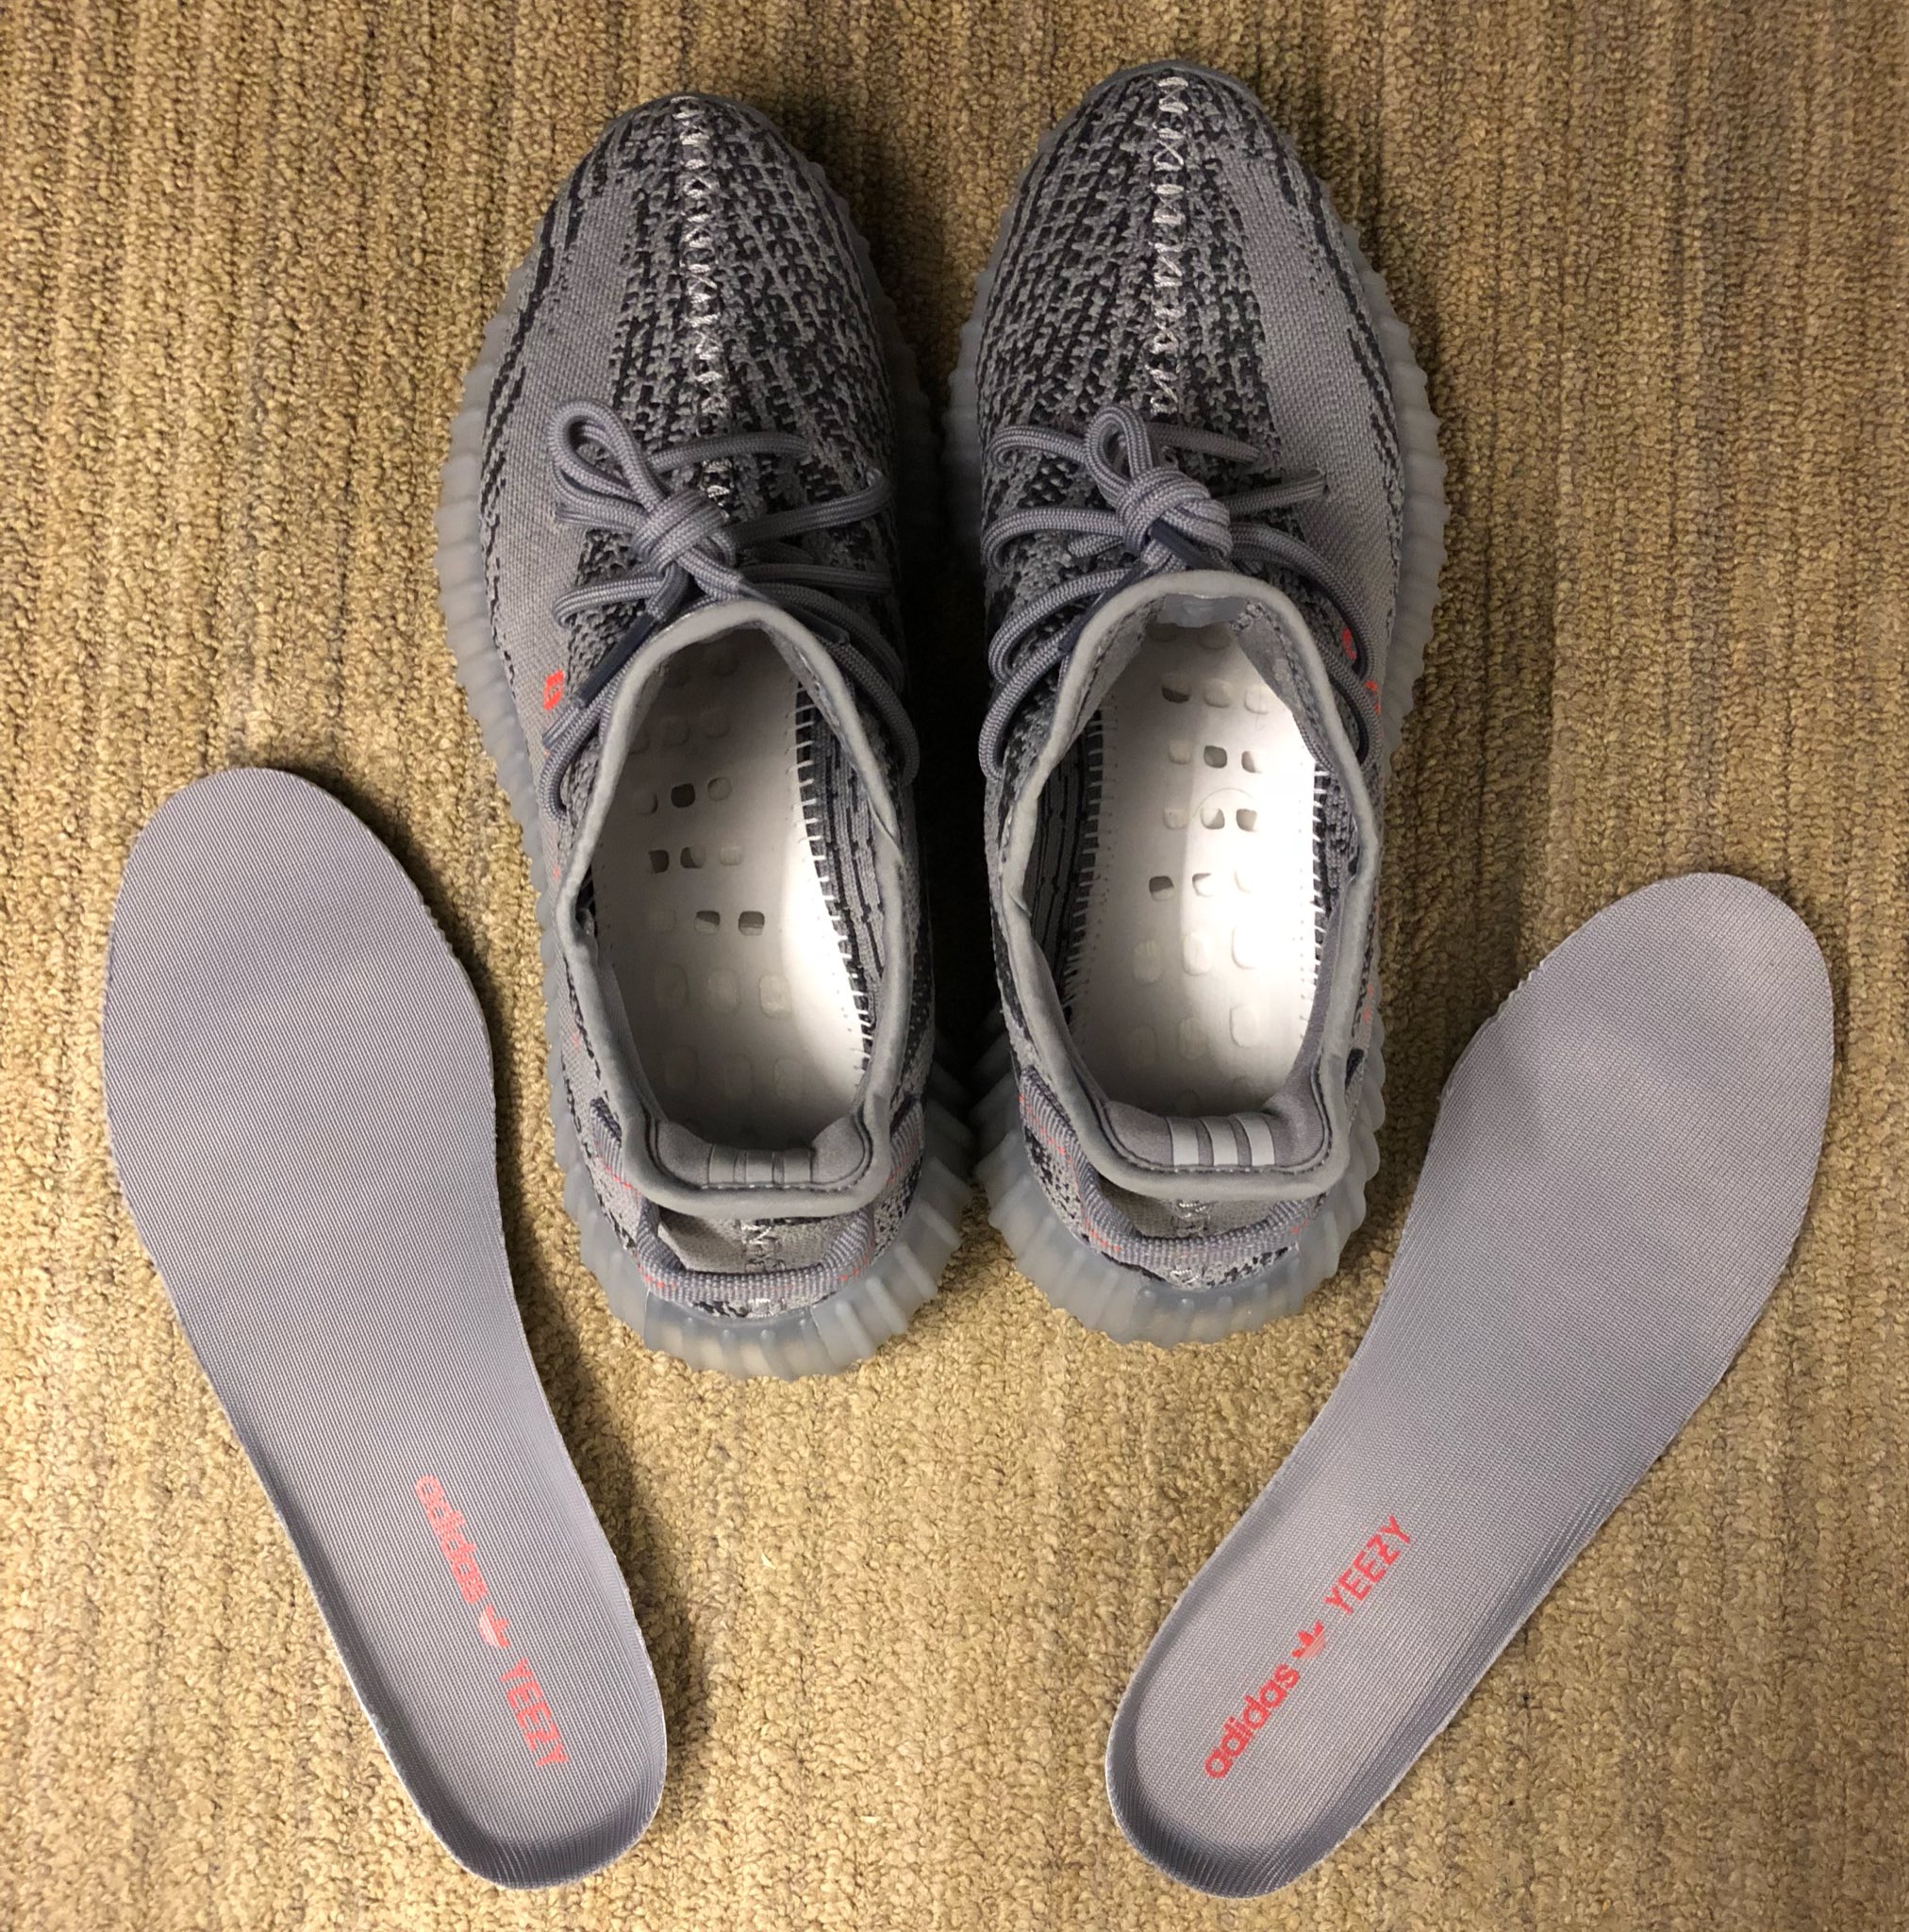 Herske suppe Kilde Heskicks on Twitter: "Solution. If your Yeezys run a lil snug, remove the  insoles. 👍 #themoreyouknow🌈 https://t.co/tcZPTFMZx8" / Twitter